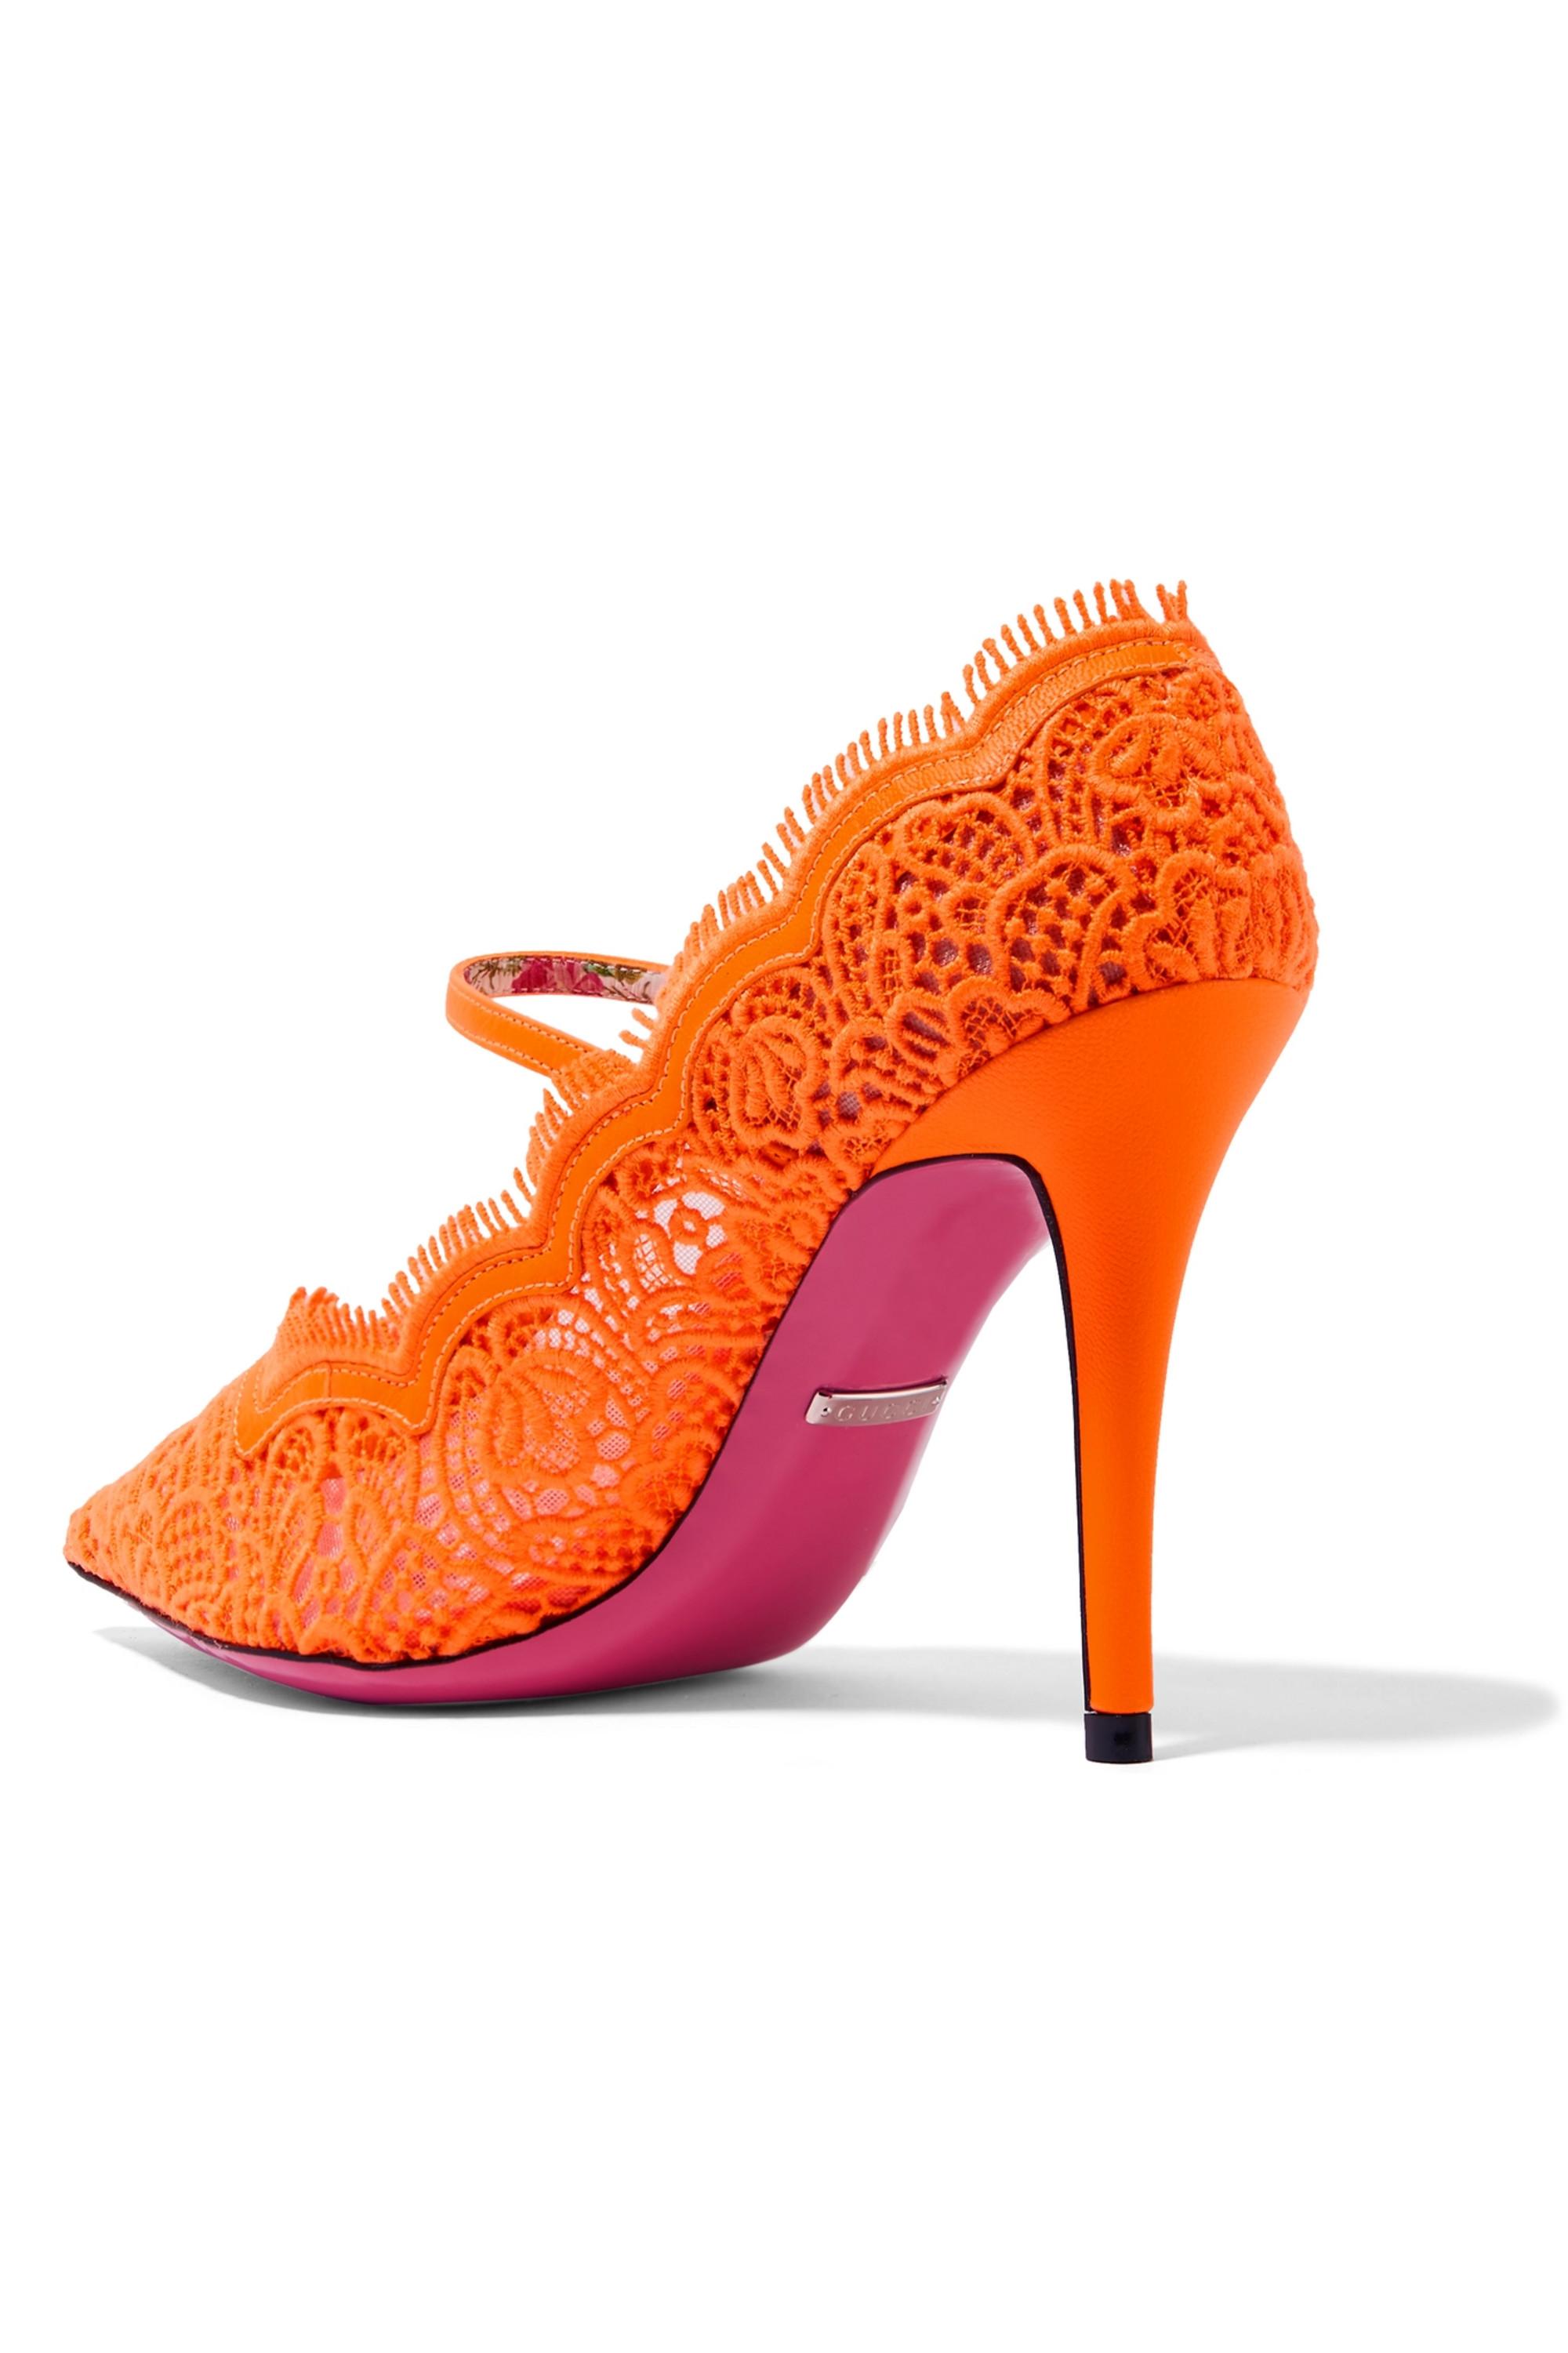 Virginia Corded Lace Mary Jane Pumps Bright Orange - Lyst